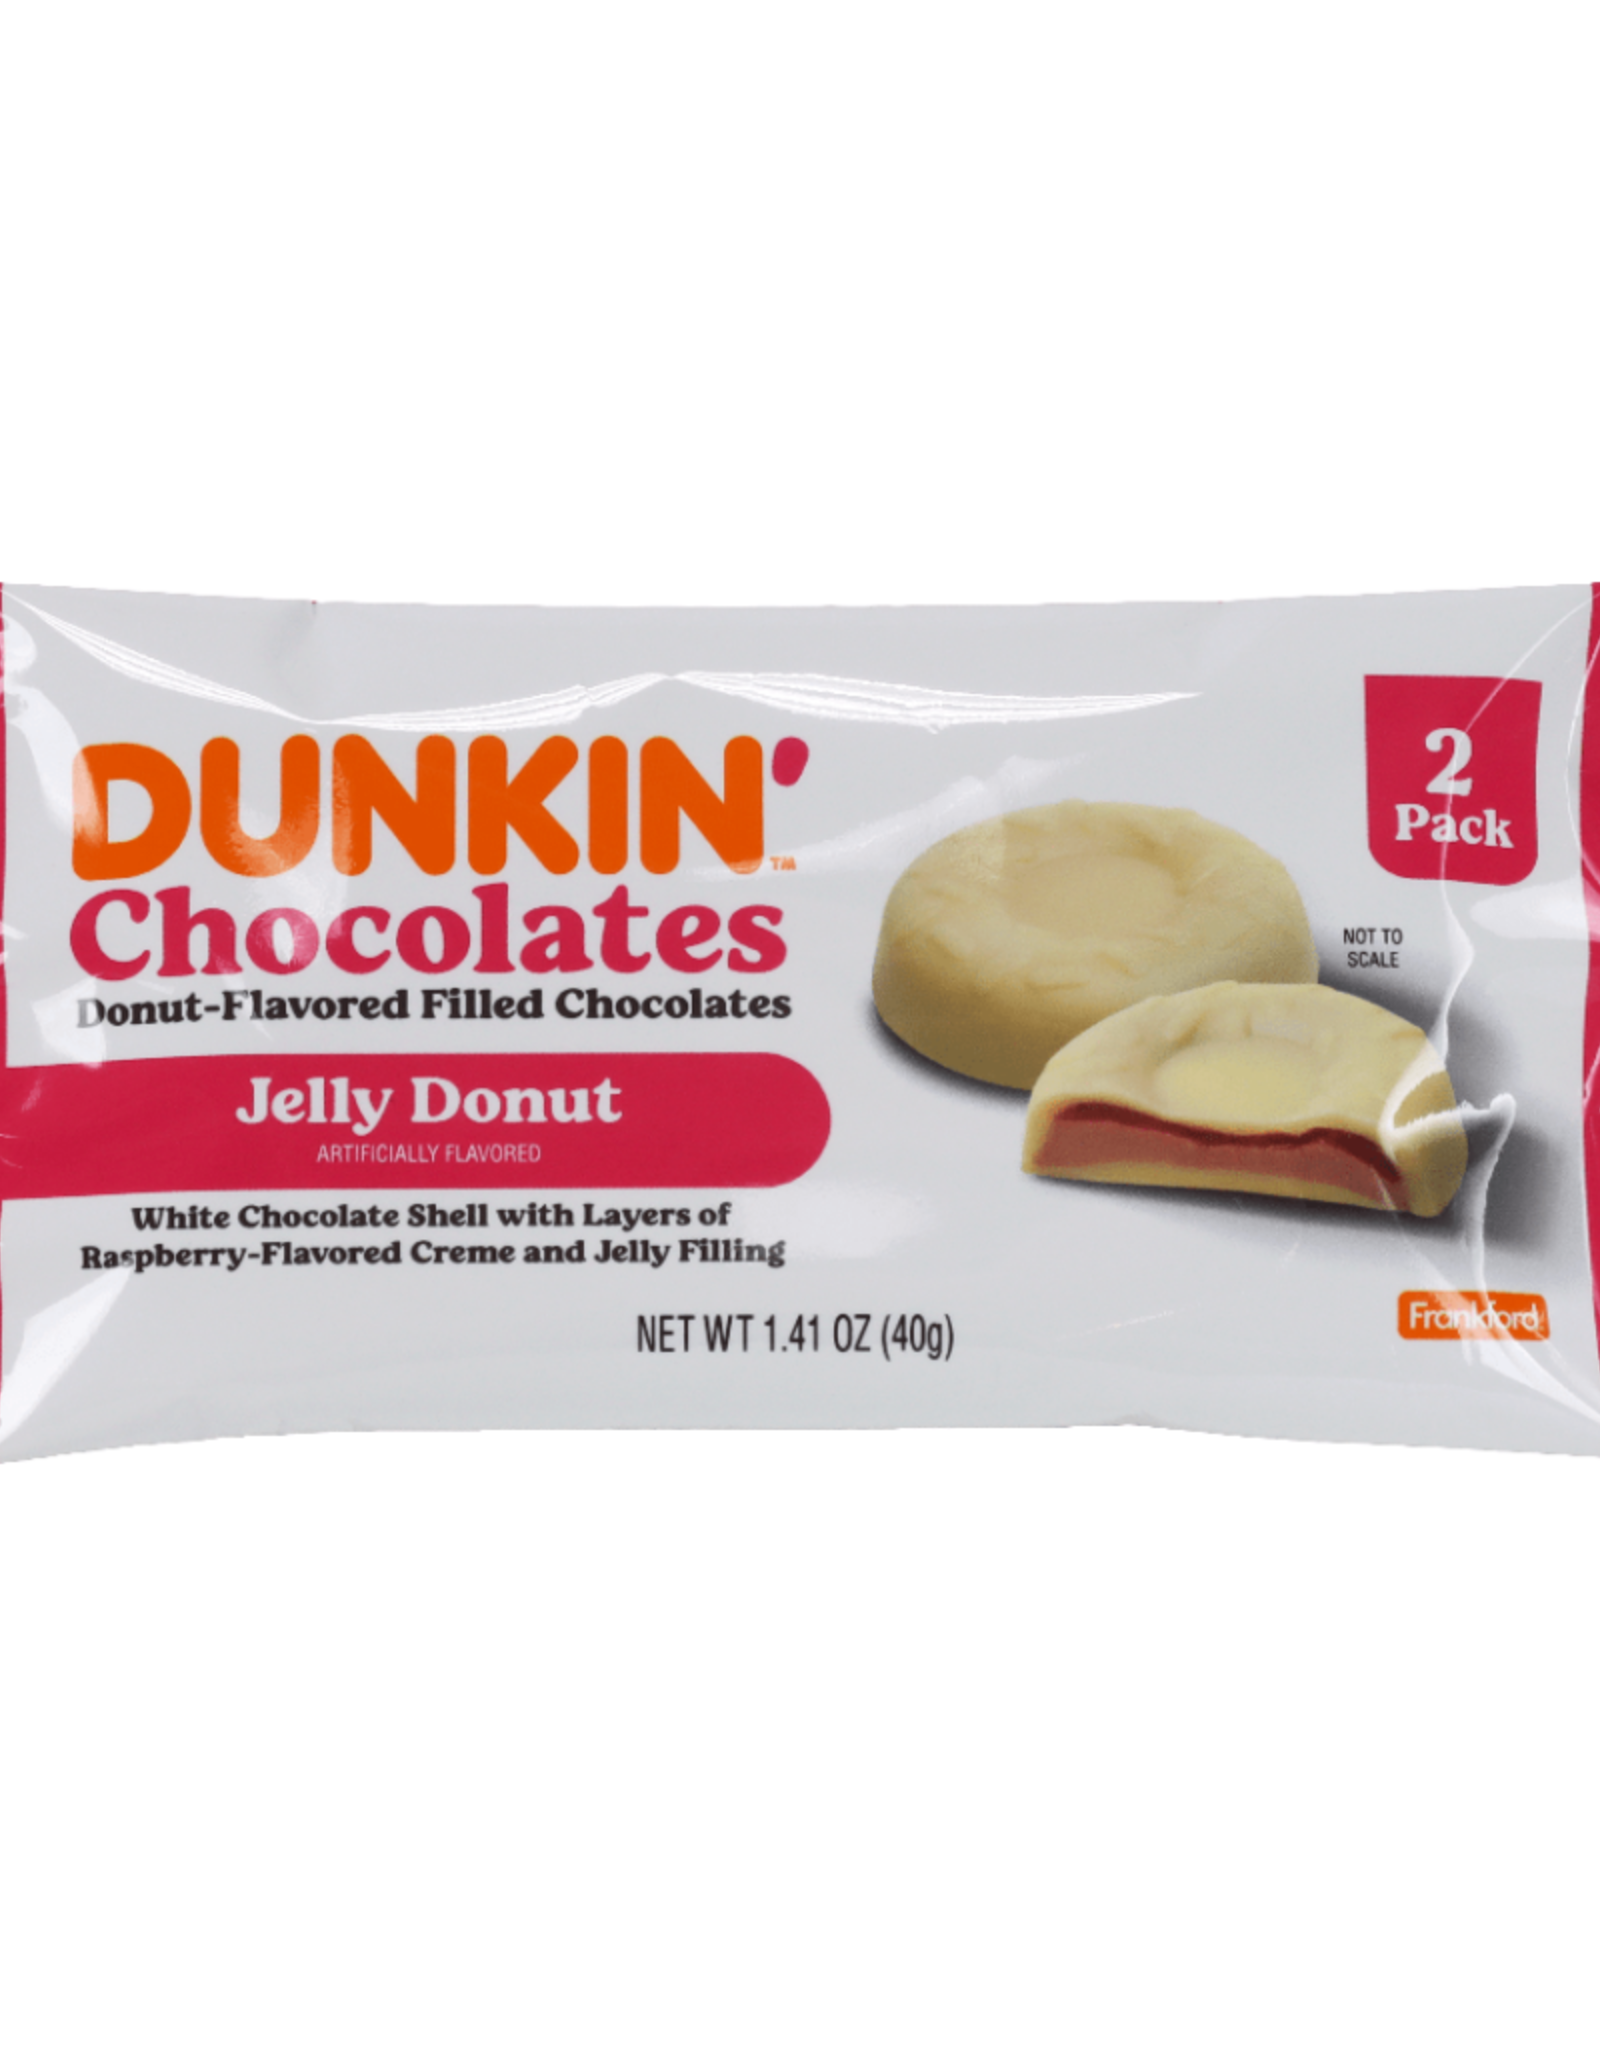 Frankford Dunkin' Chocolates Jelly Donut Two Pack